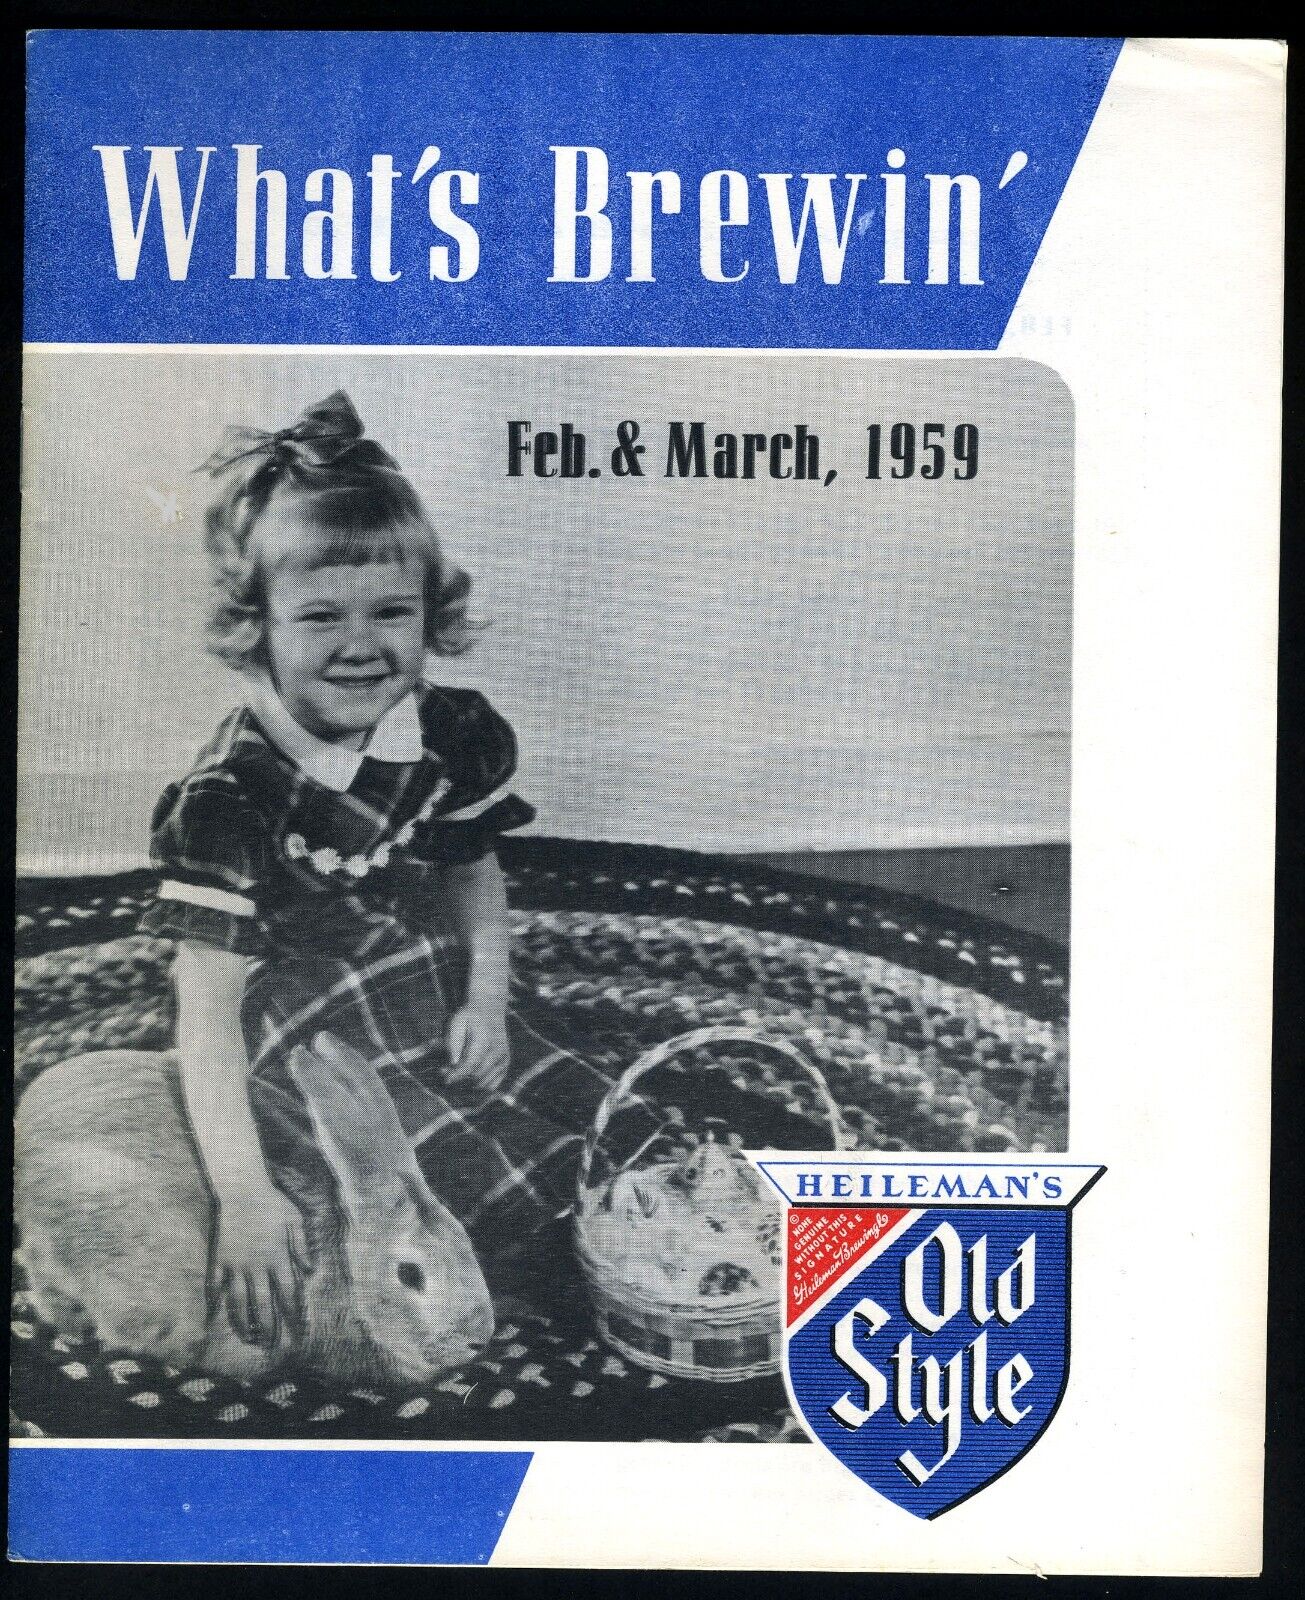 Old Style G. Heileman Brewing Co. La Crosse WI. Promo 1959 Company Newsletter